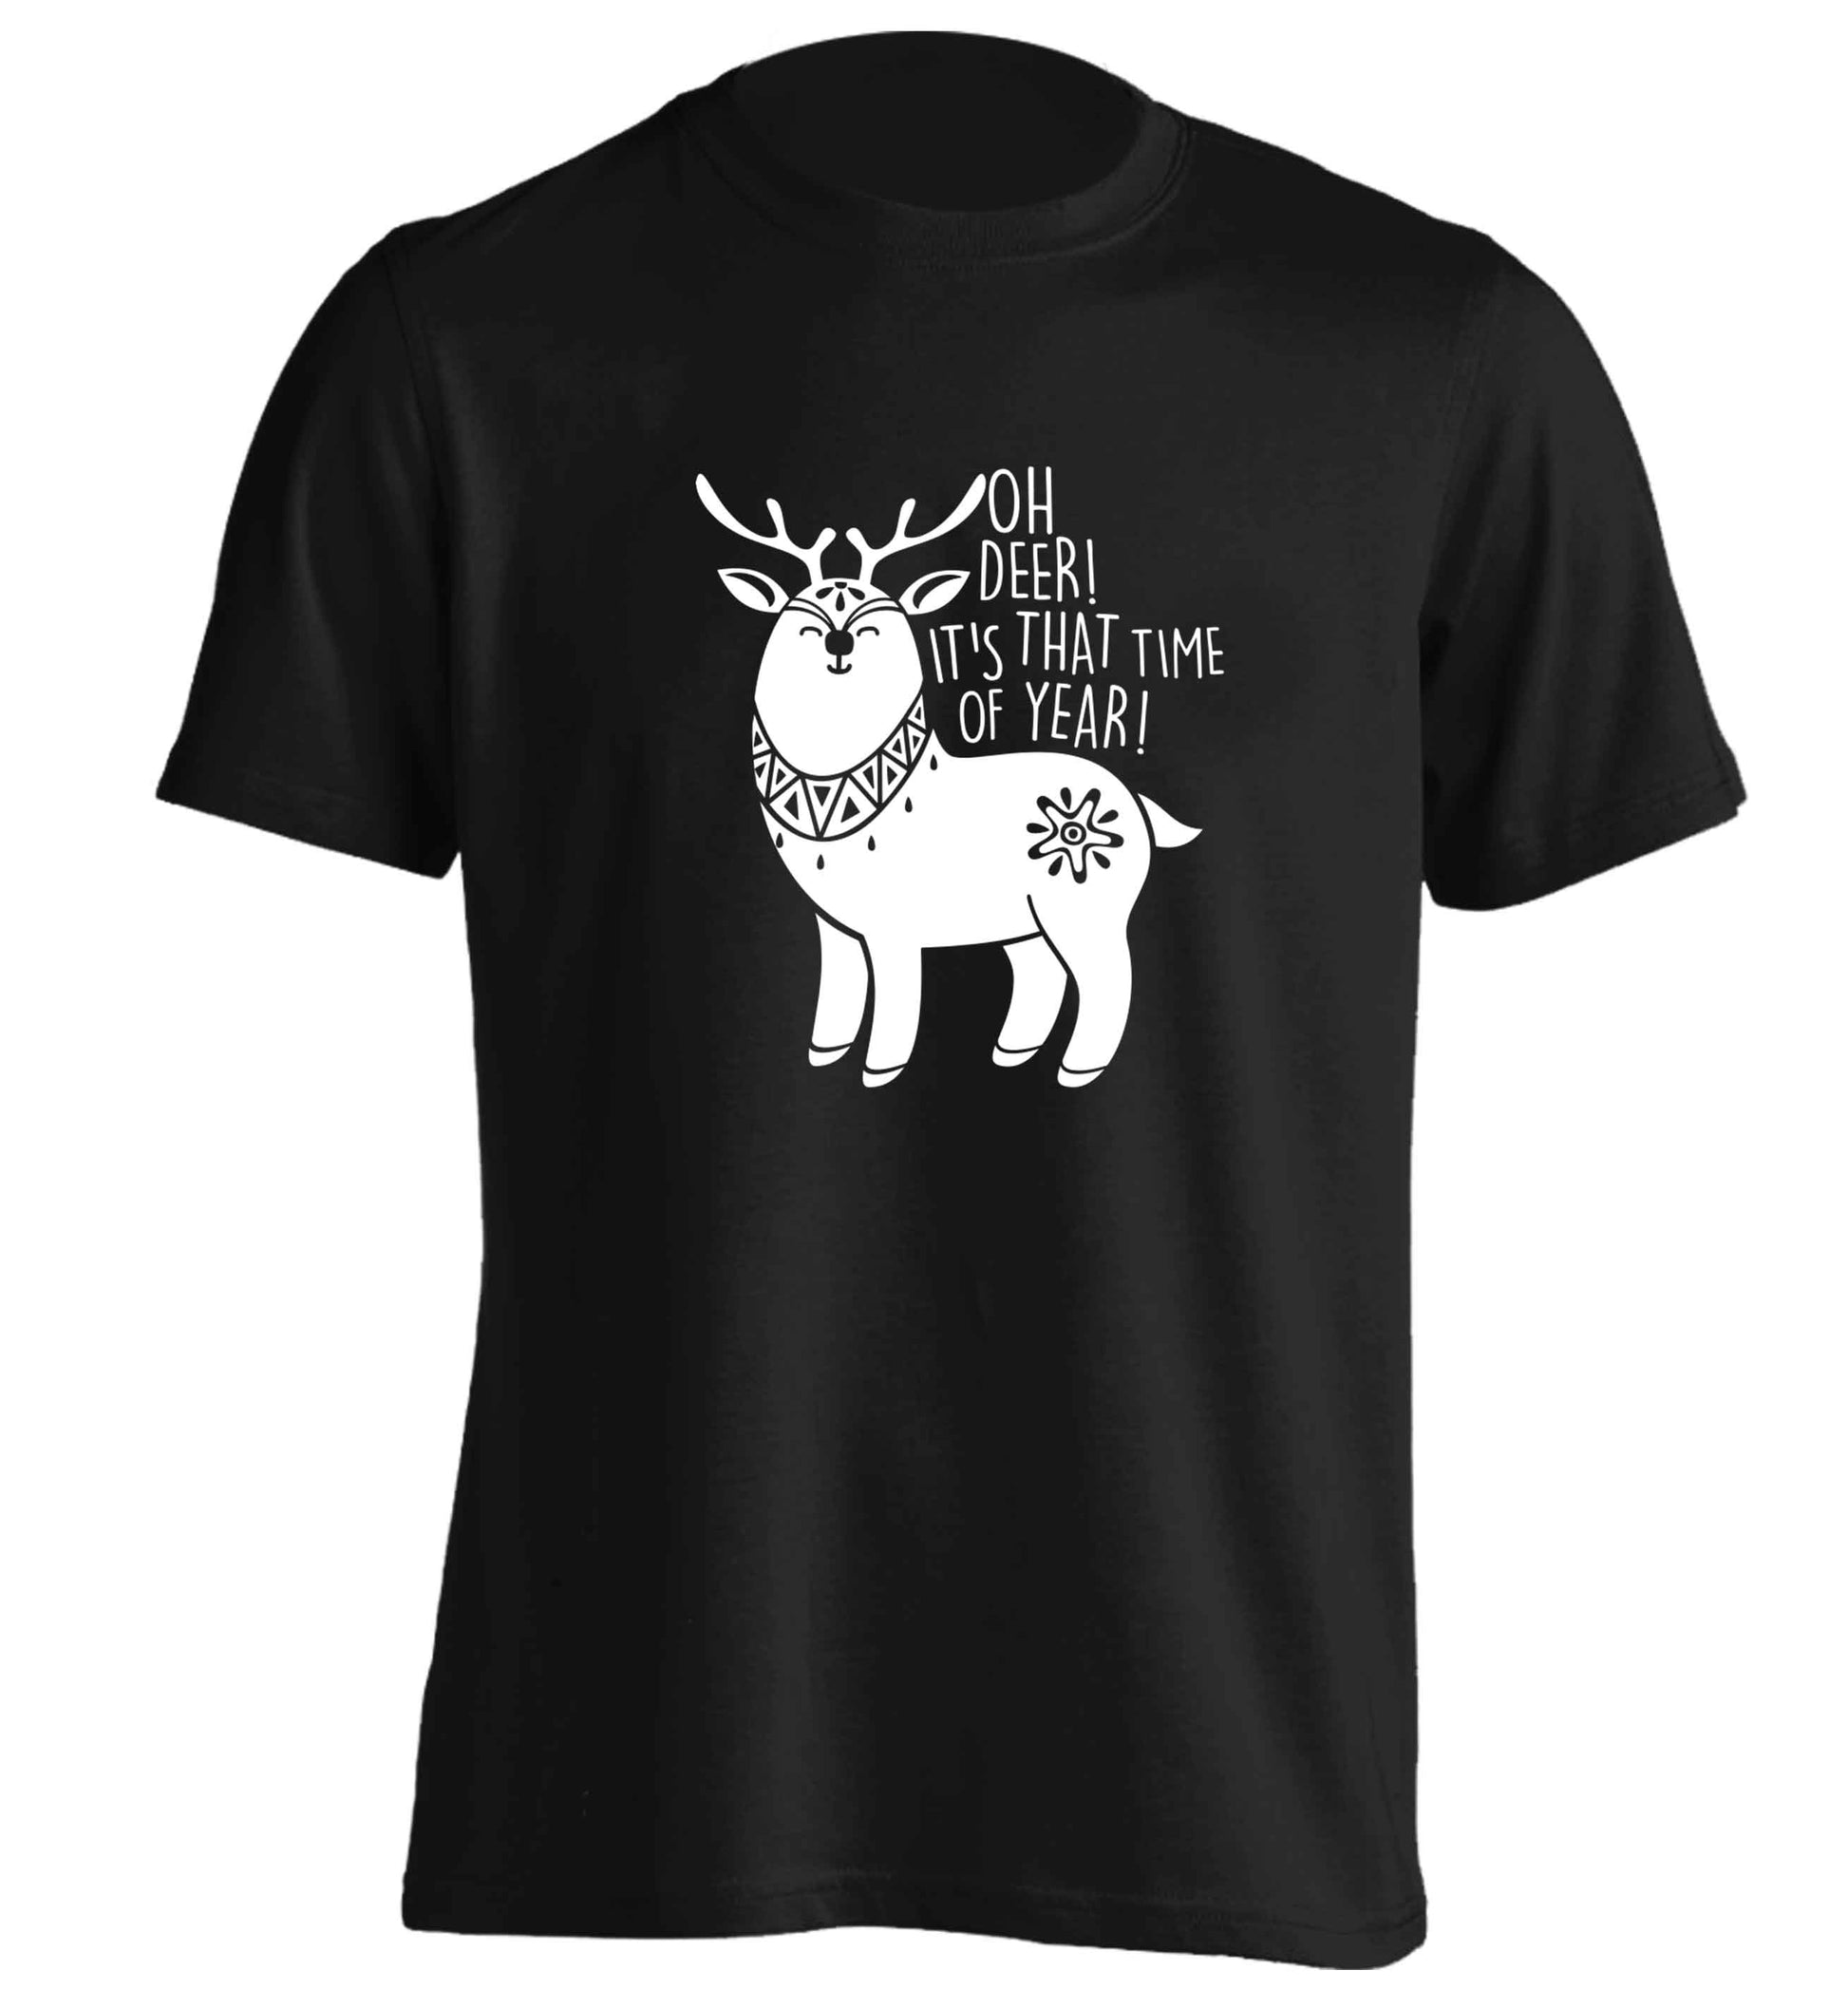 Oh dear it's that time of year adults unisex black Tshirt 2XL